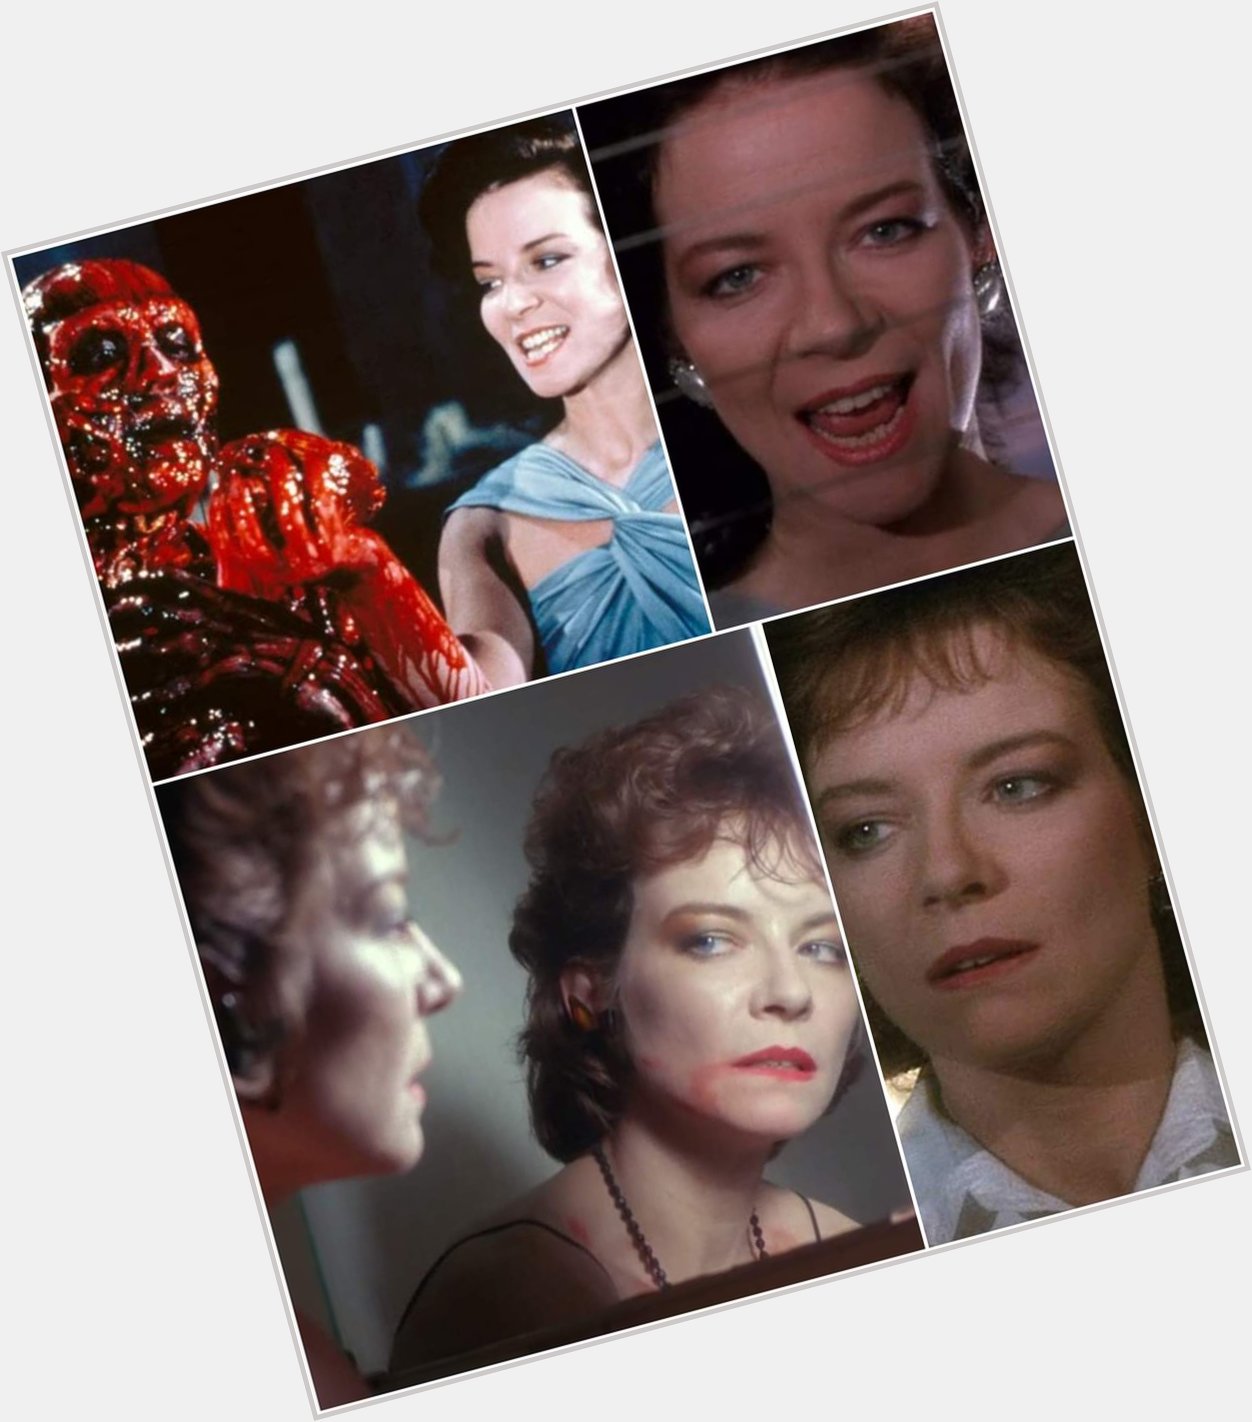 Happy (belated) 66th birthday to Clare Higgins!

(Pic collage by Art of Horror) 